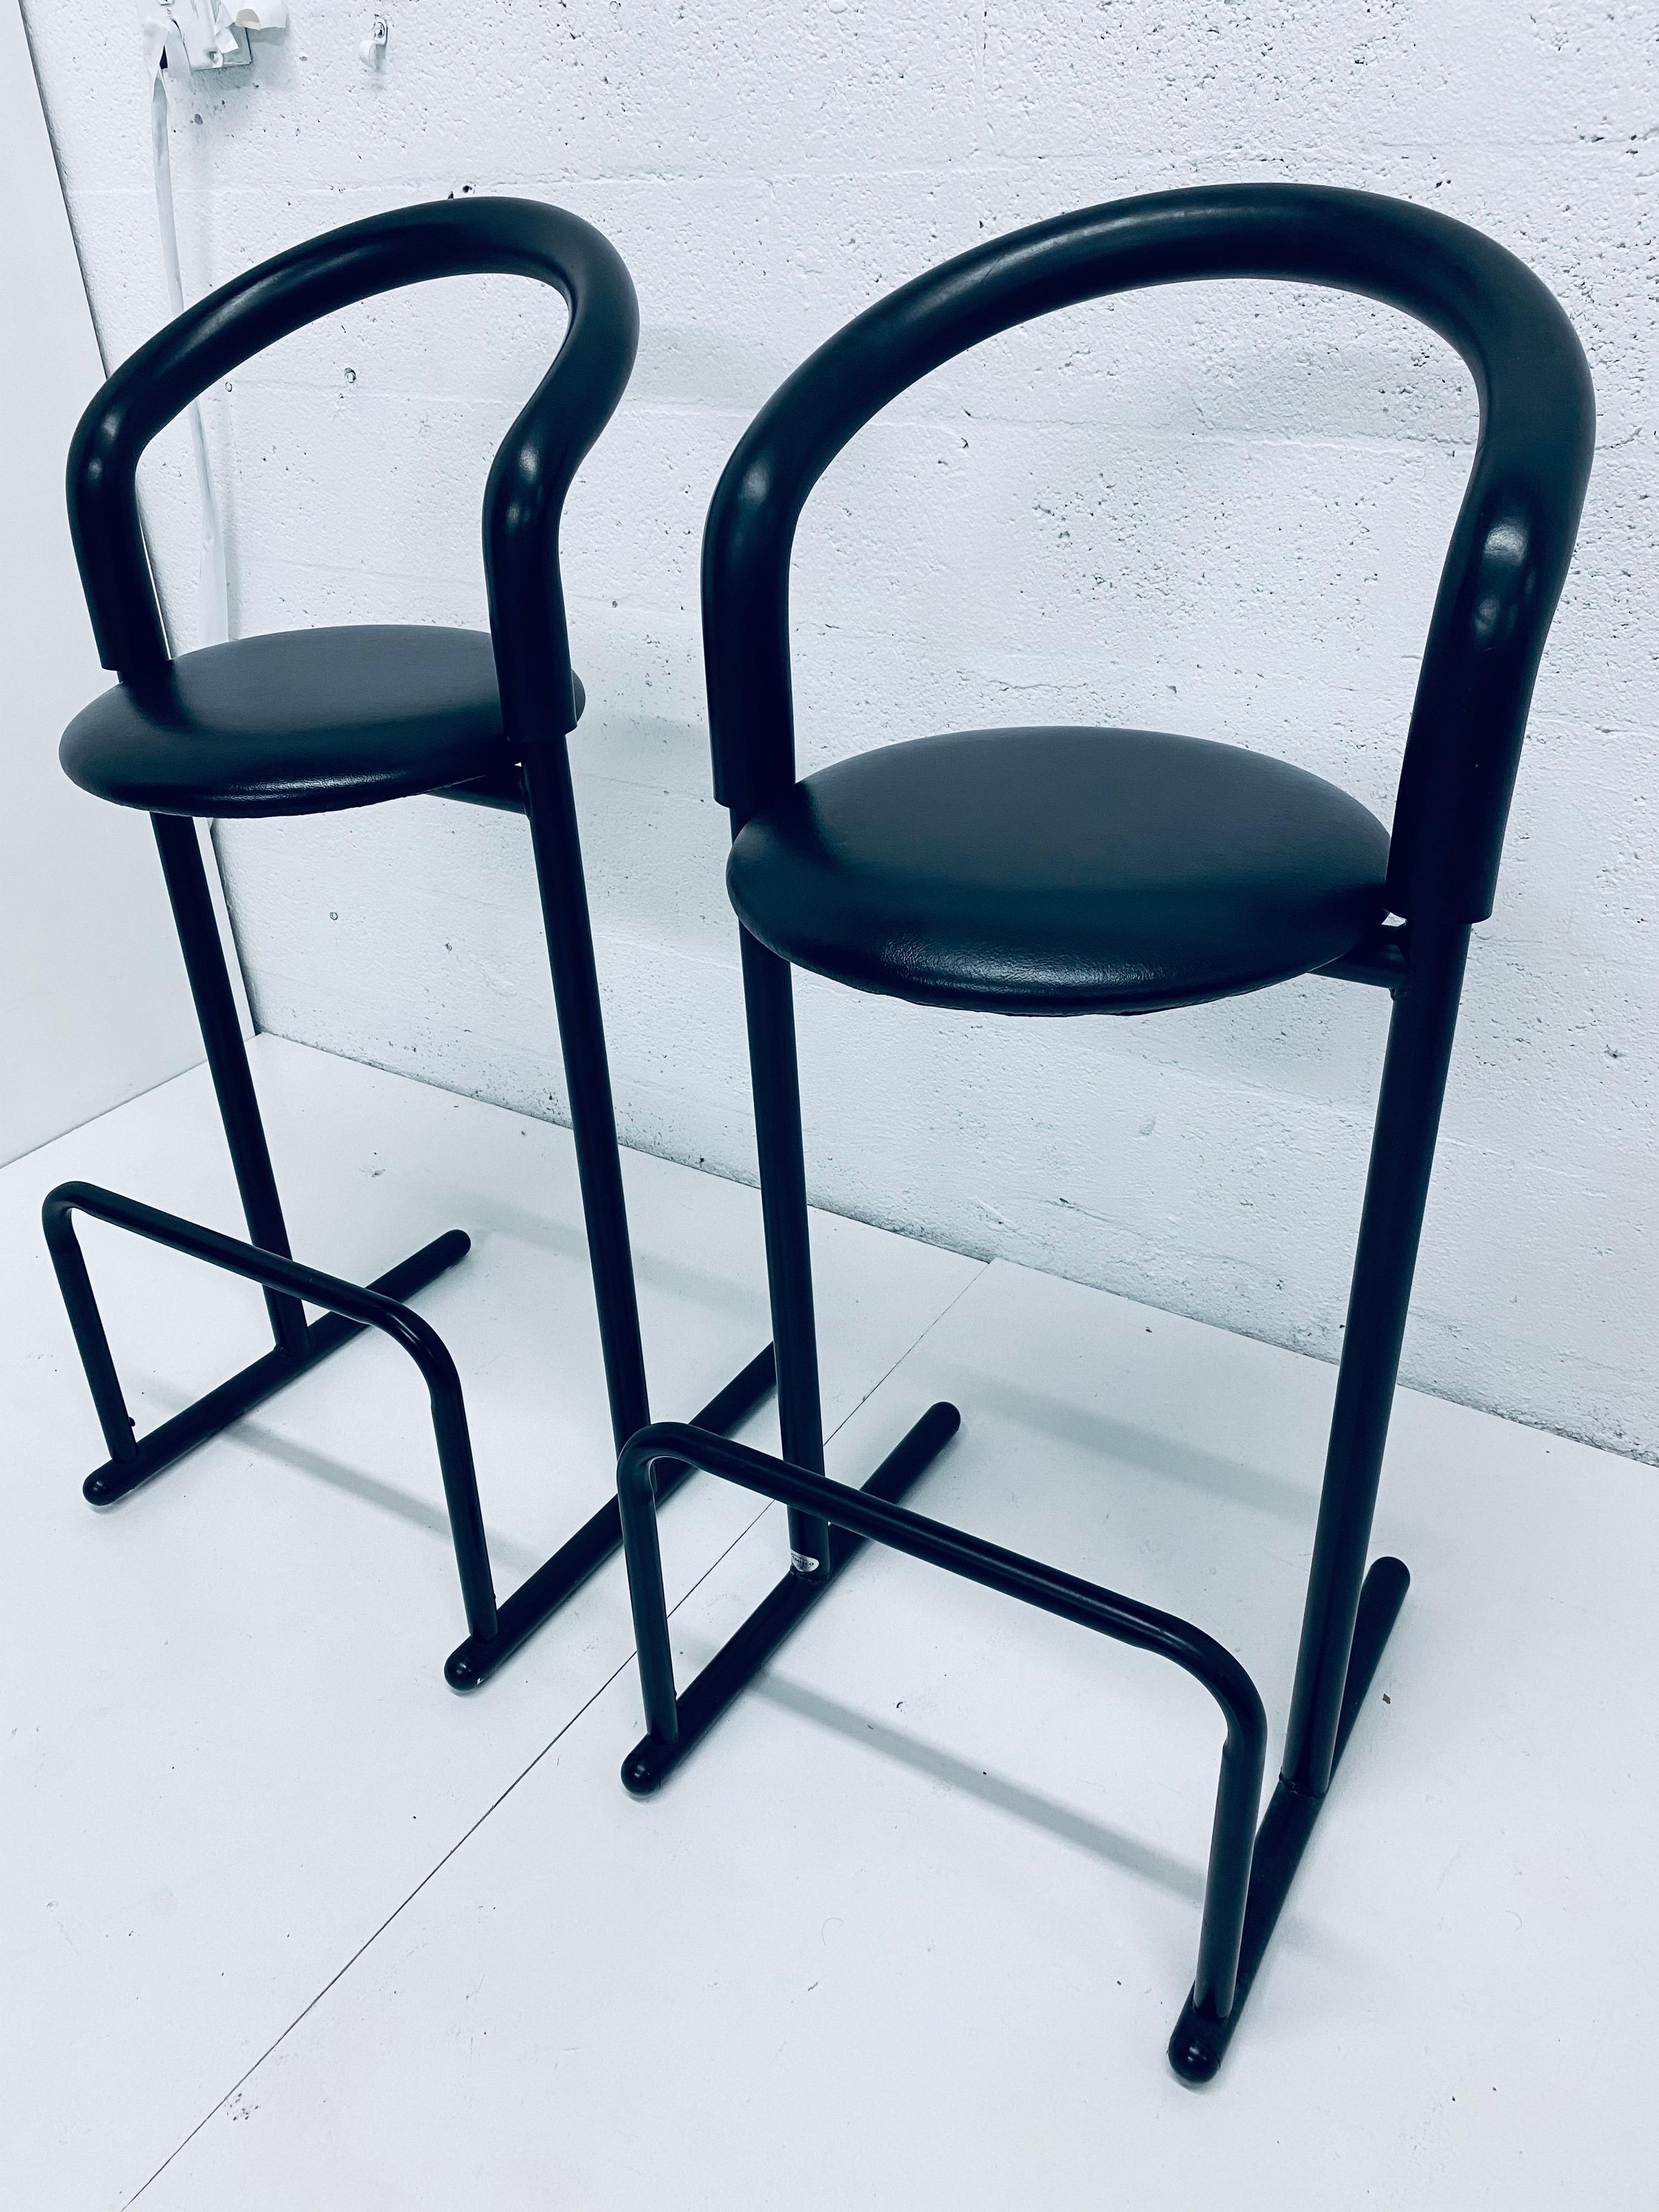 Postmodern 1980s designed tubular bar chairs / stools with foam backs and Naugahyde cushions in all black manufactured by Les Industries Amisco, Canada.